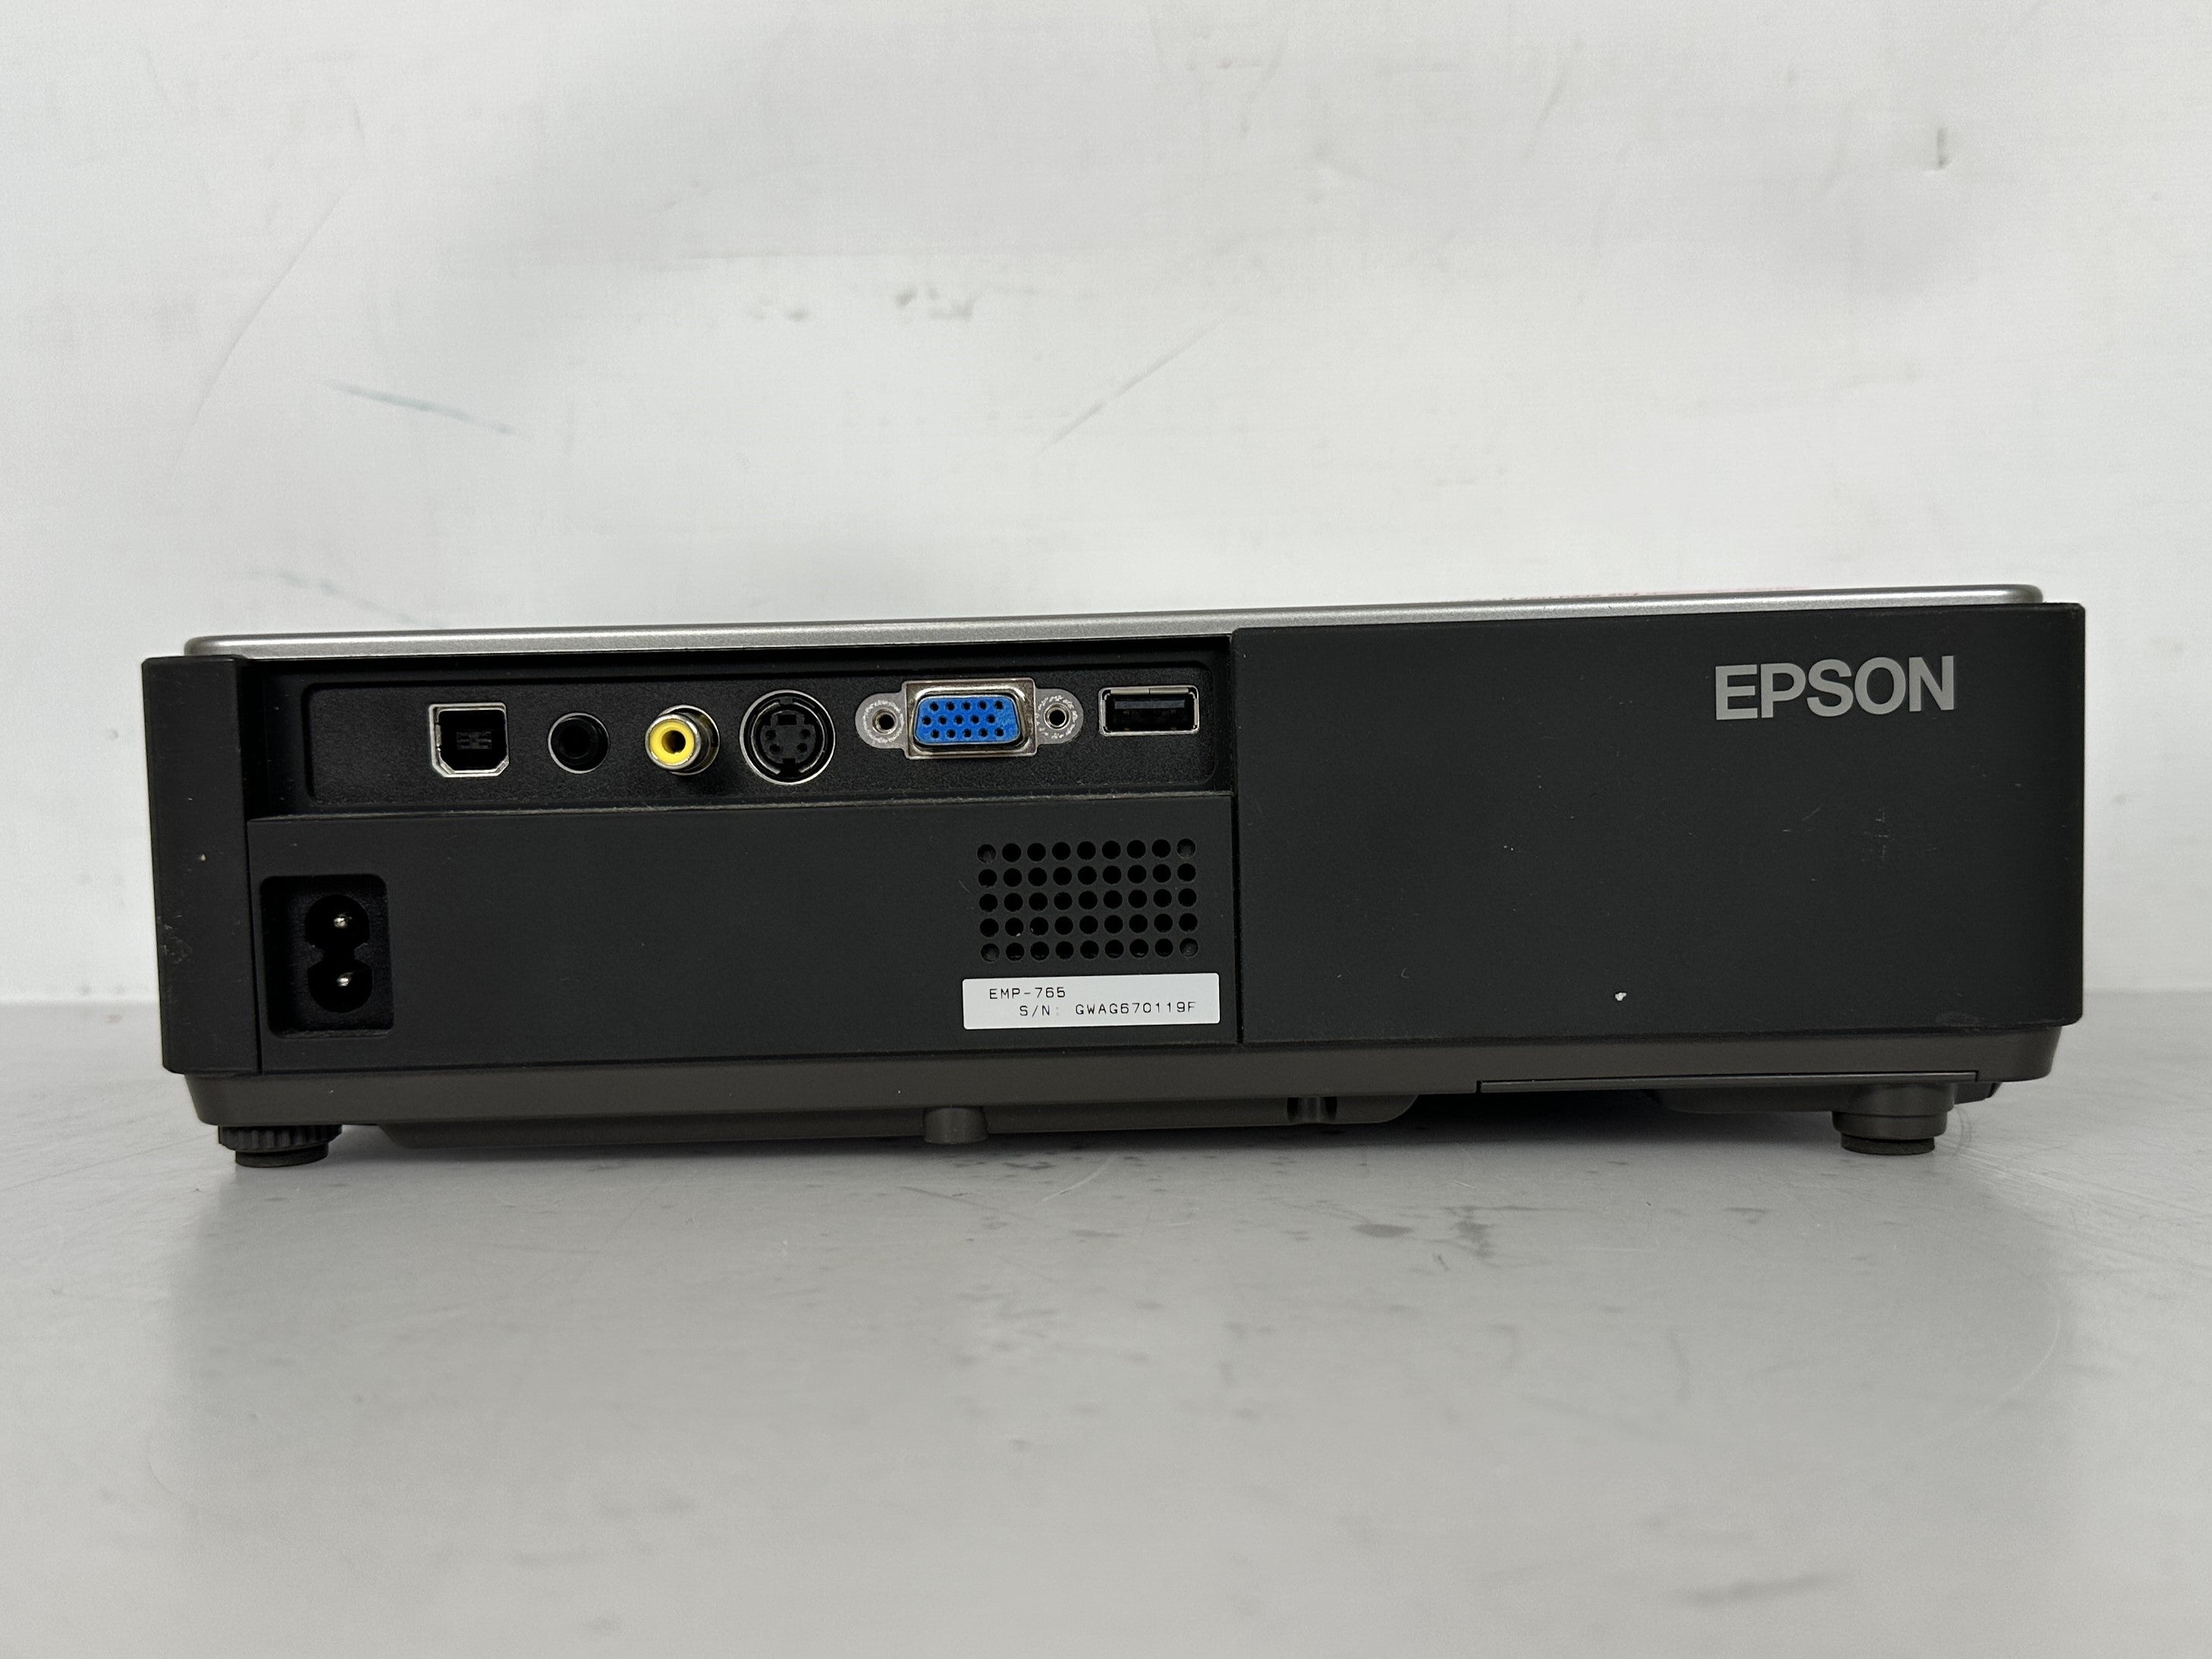 Epson Powerlite 765c LCD Projector w/ Carrying Case (700 Hours)